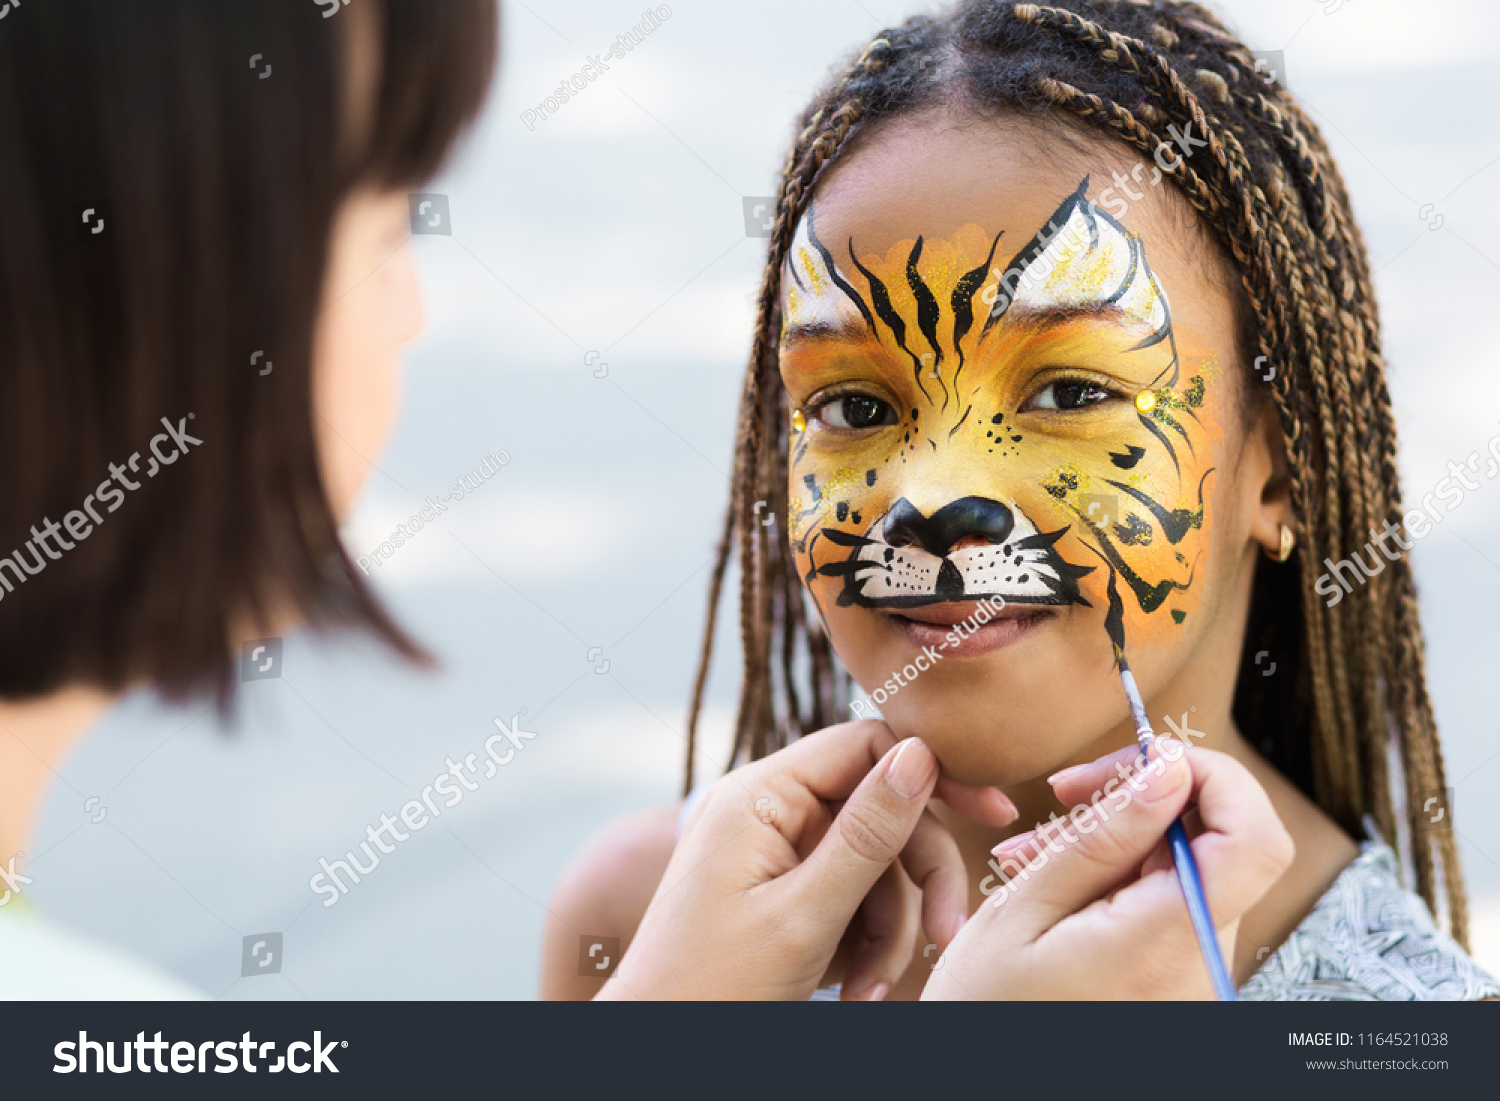 Cute little tiger. African-american girl getting face painting outdoors, having fun, copy space #1164521038